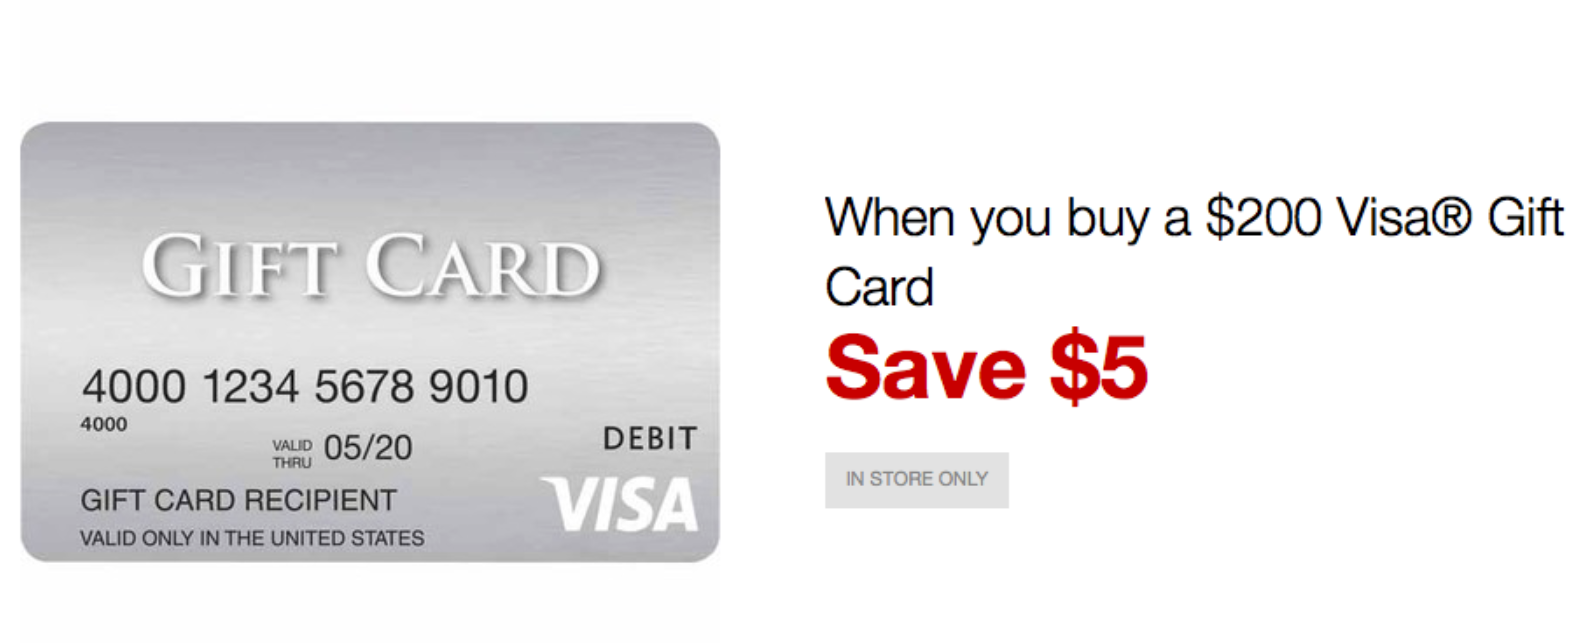 (Now Live!) 5 Discount on Visa Gift Cards at Staples Miles to Memories